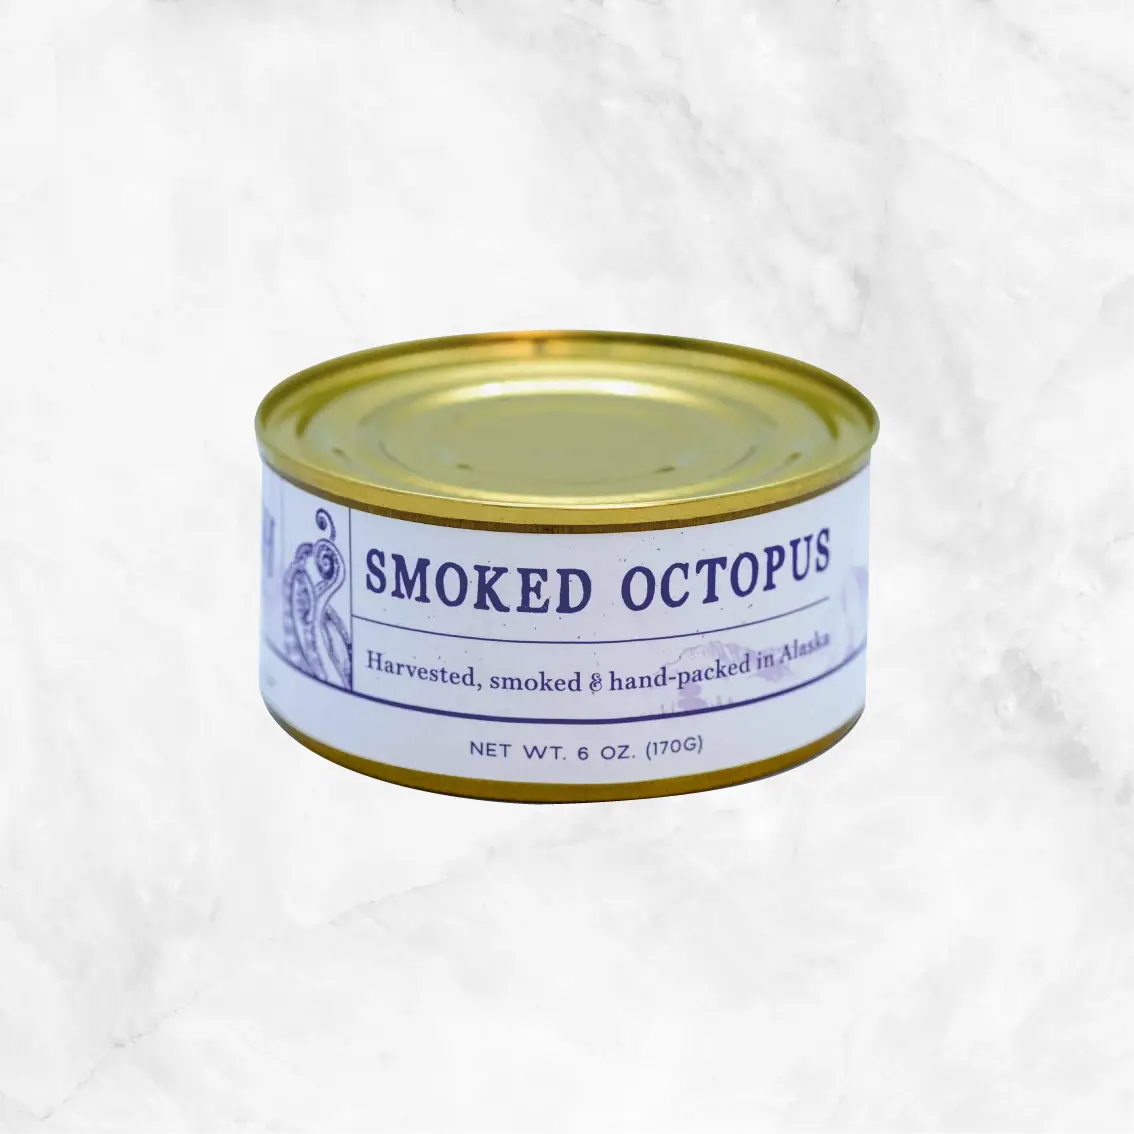 Smoked Octopus in Bullwhip Hot Sauce (Limited)